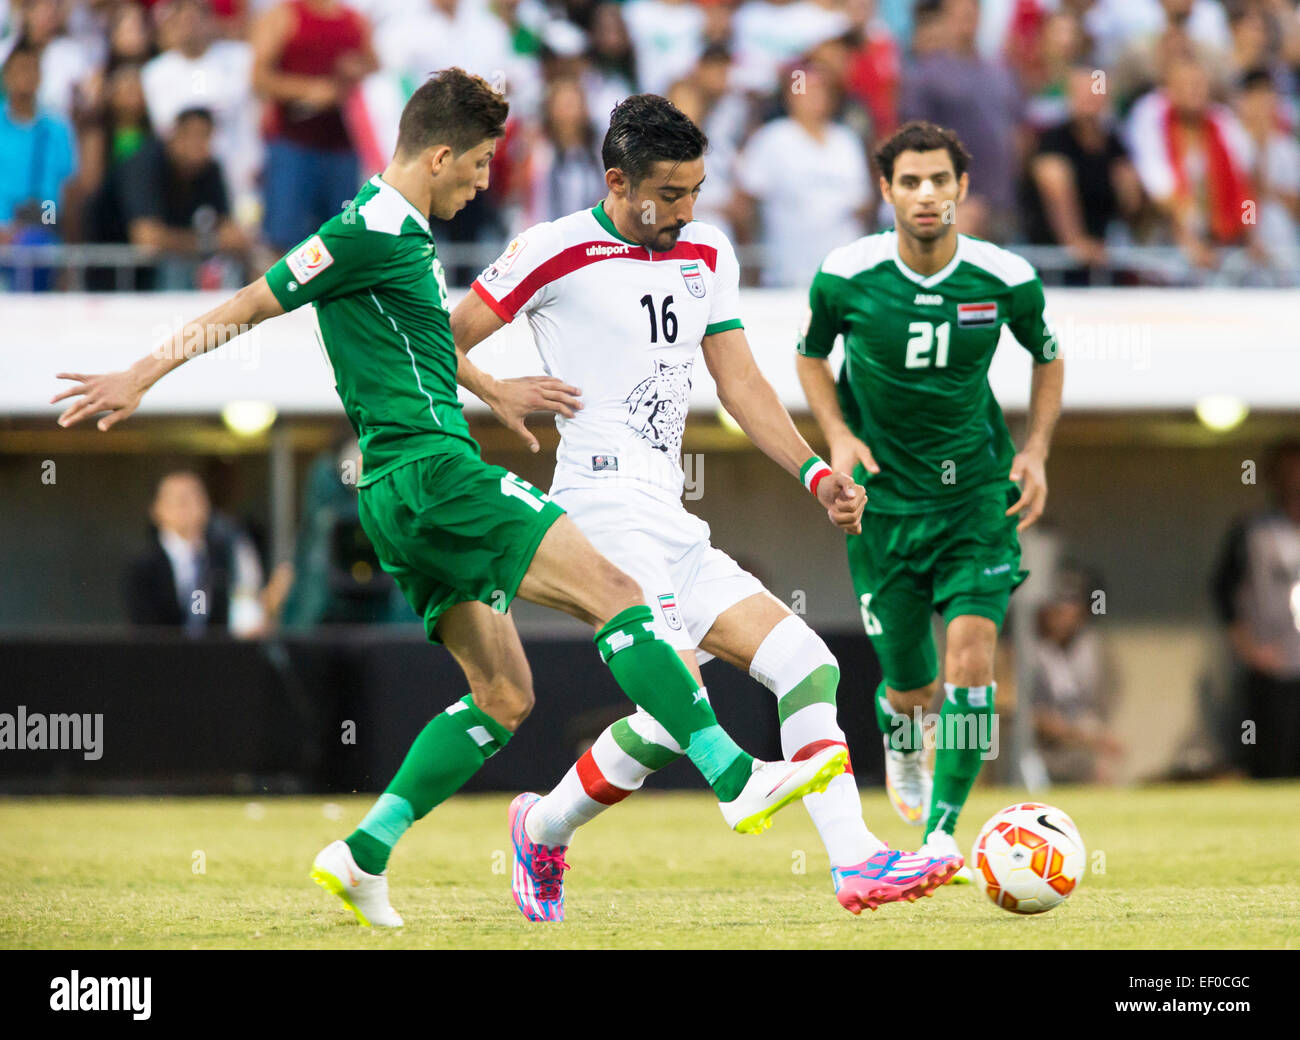 Canberra, Australia. 23rd Jan, 2015. Reza Ghoochannejhad (16) of Iran takes the ball across the Iraqi defines in the FIFA Asian Football Confederation 2015 Asian Cup quarter-final game played in Canberra Stadium, Canberra, Australia © Action Plus Sports/Alamy Live News Stock Photo